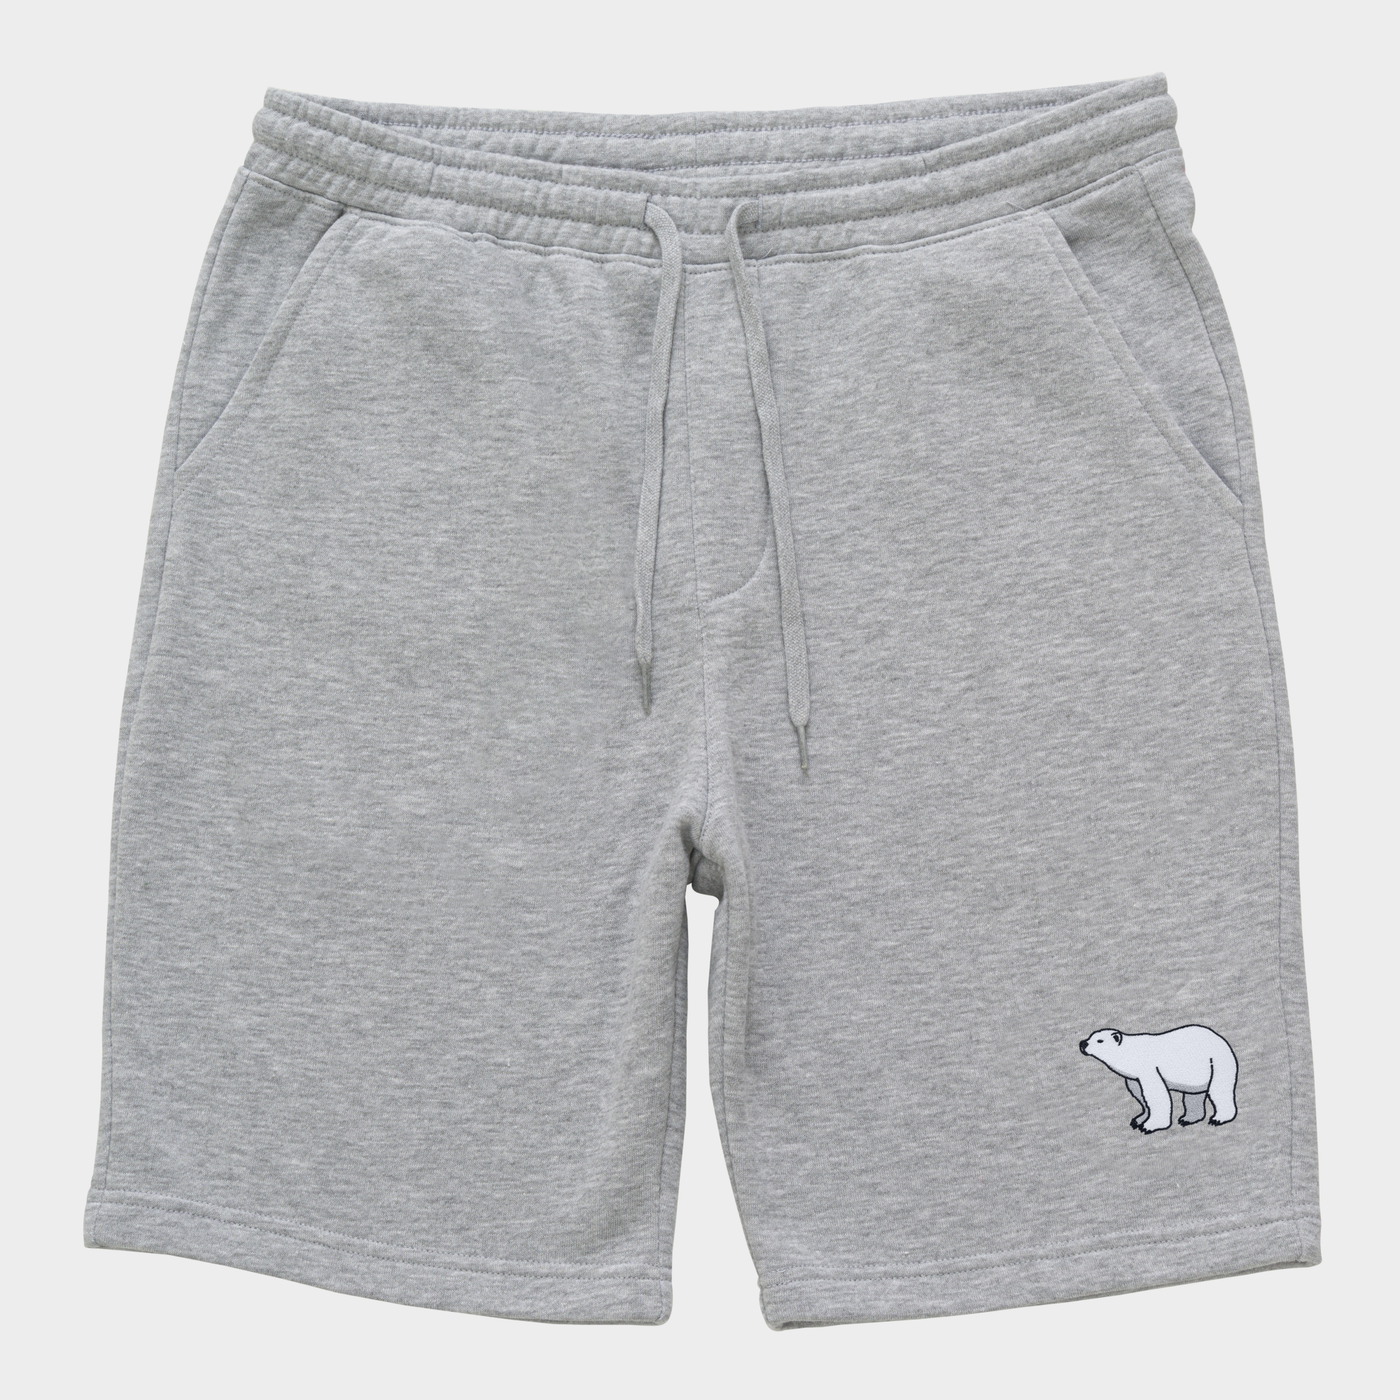 Bobby's Planet Men's Embroidered Polar Bear Shorts from Arctic Polar Animals Collection in Heather Grey Color#color_heather-grey